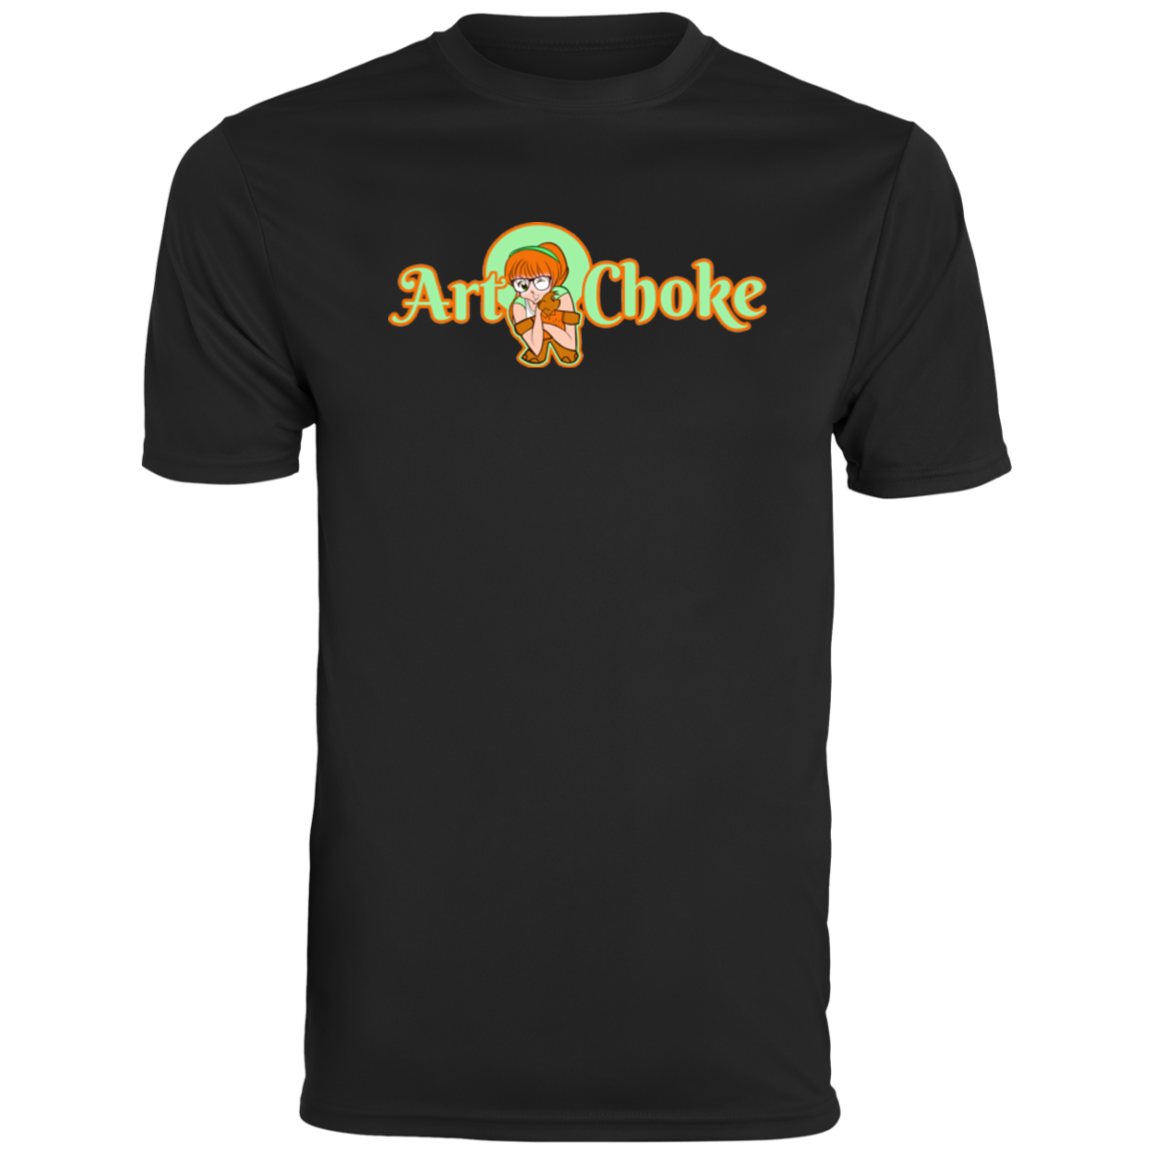 ArtichokeUSA Character and Font Design. Let’s Create Your Own Design Today. Winnie. Men's Moisture-Wicking Tee